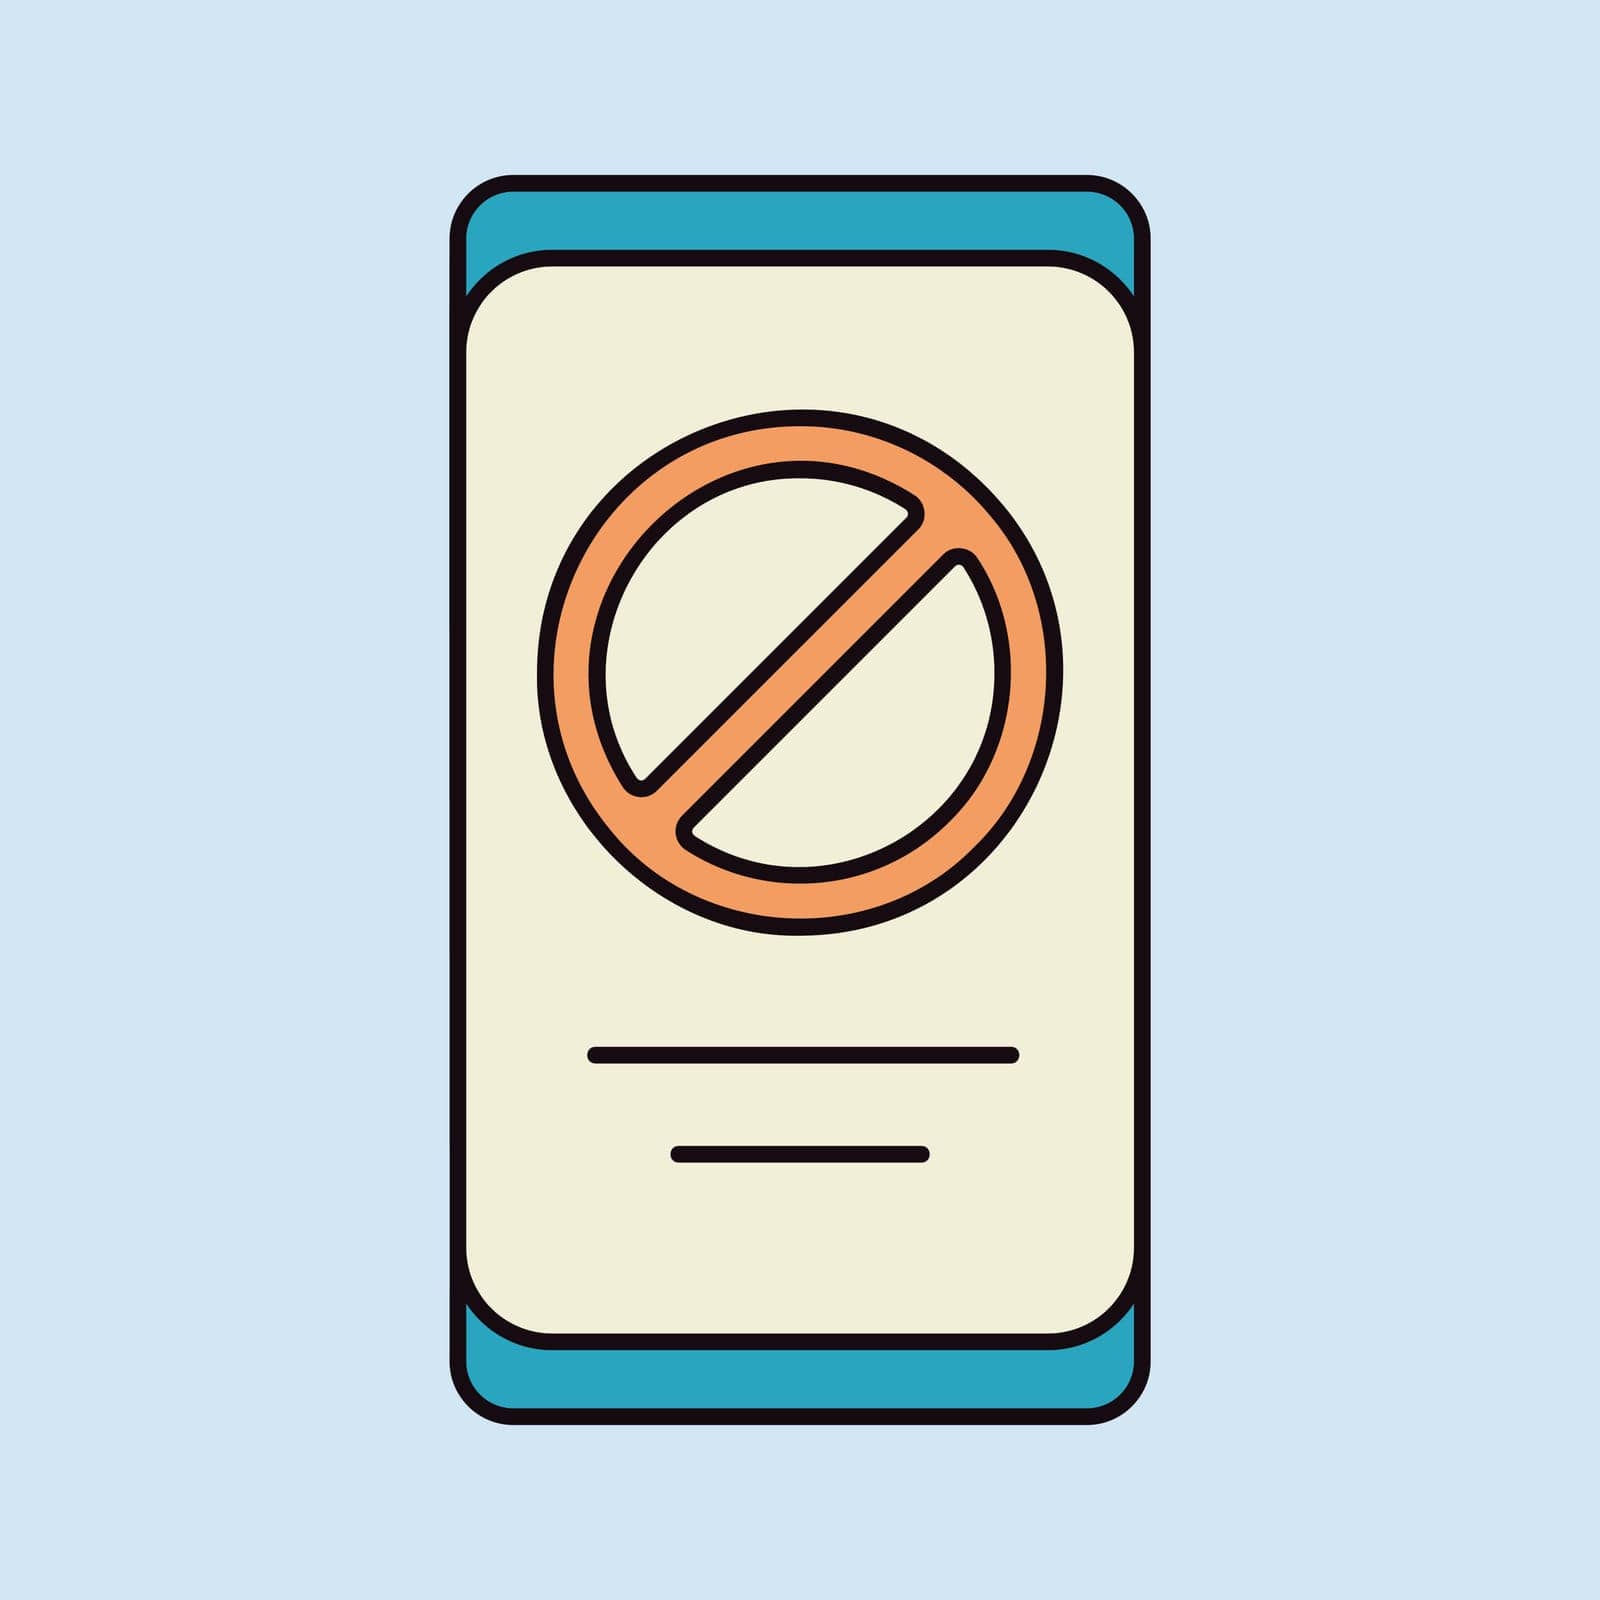 Prohibition sign on smartphone screen vector icon by nosik